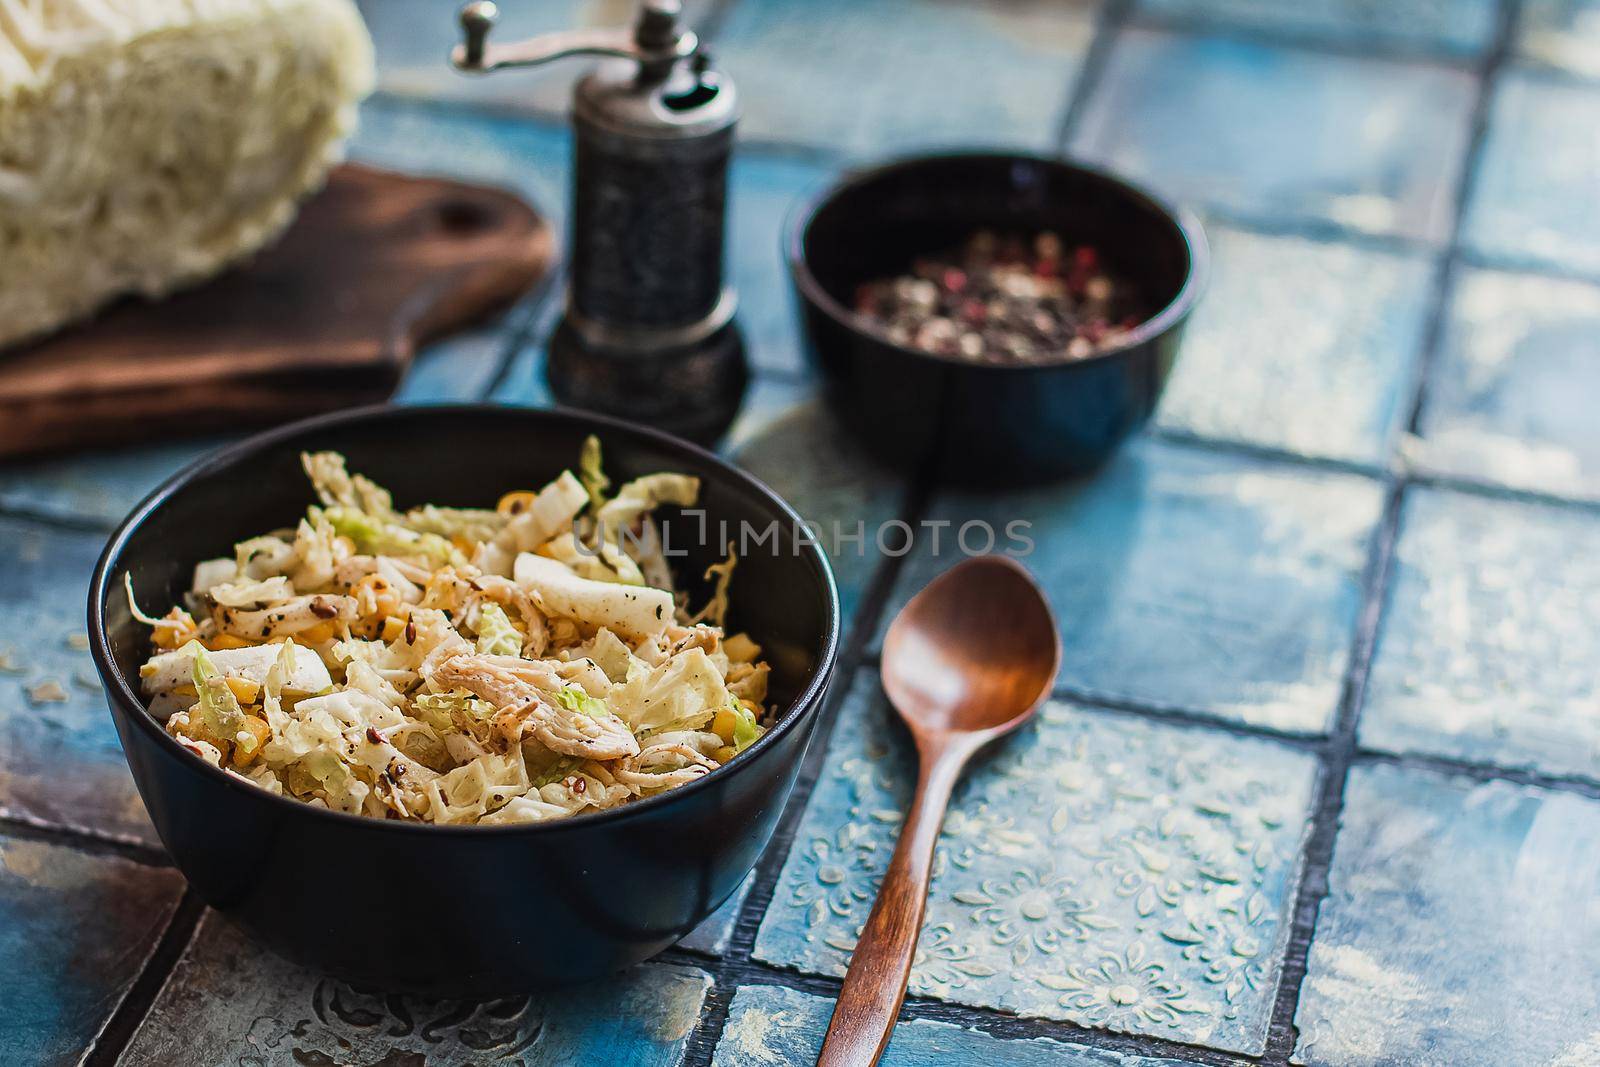 Salad with cabbage, eggs, corns and meat on the plate on rustic tiled table.